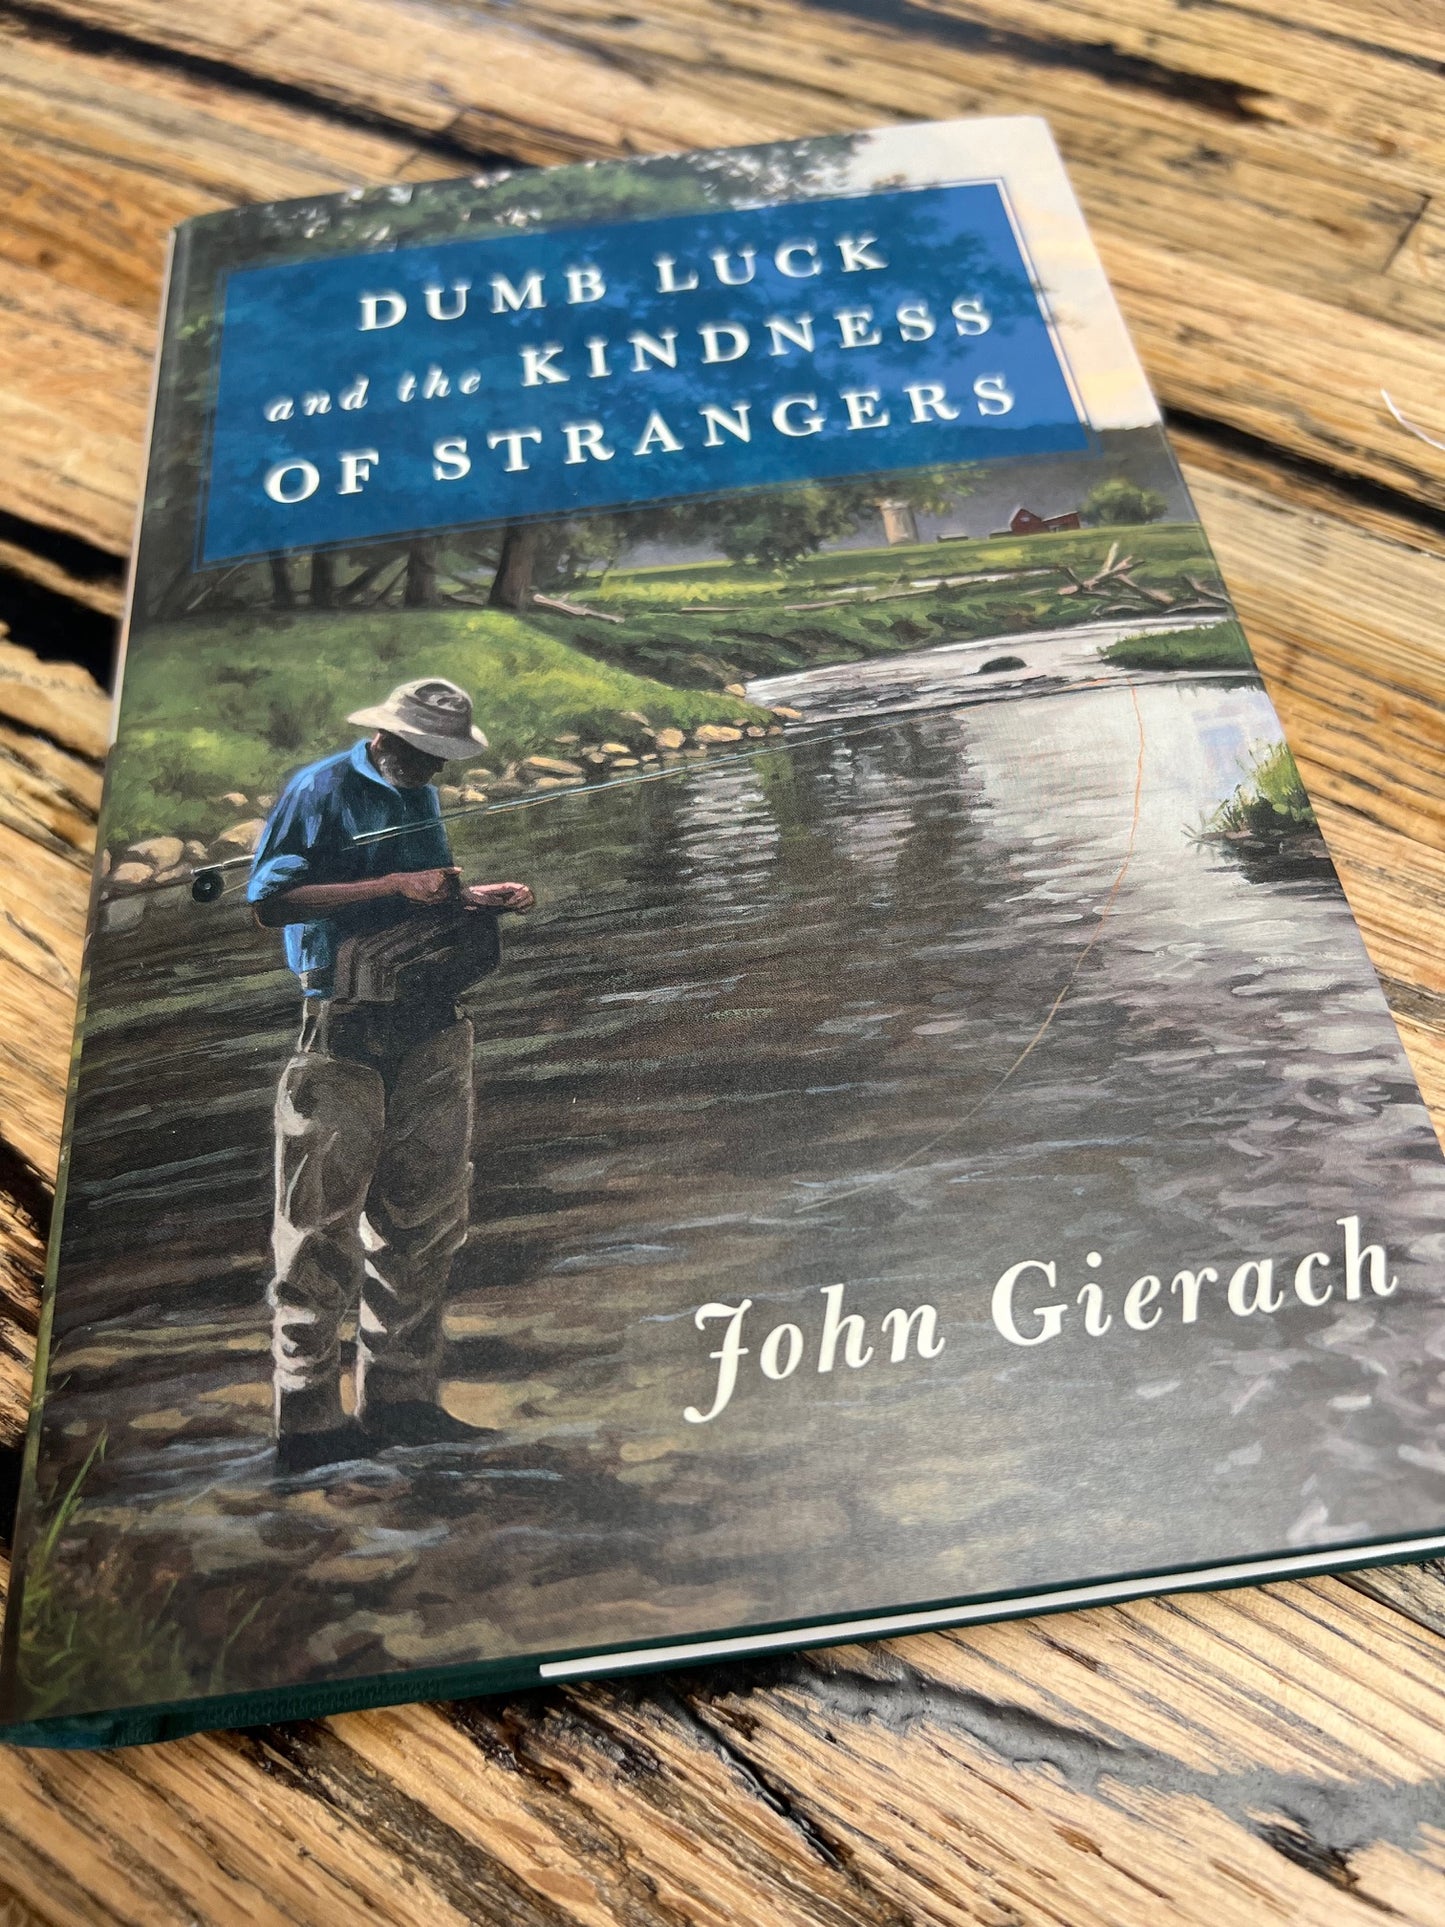 Dumb Luck and the Kindness of Strangers, by John Gierach